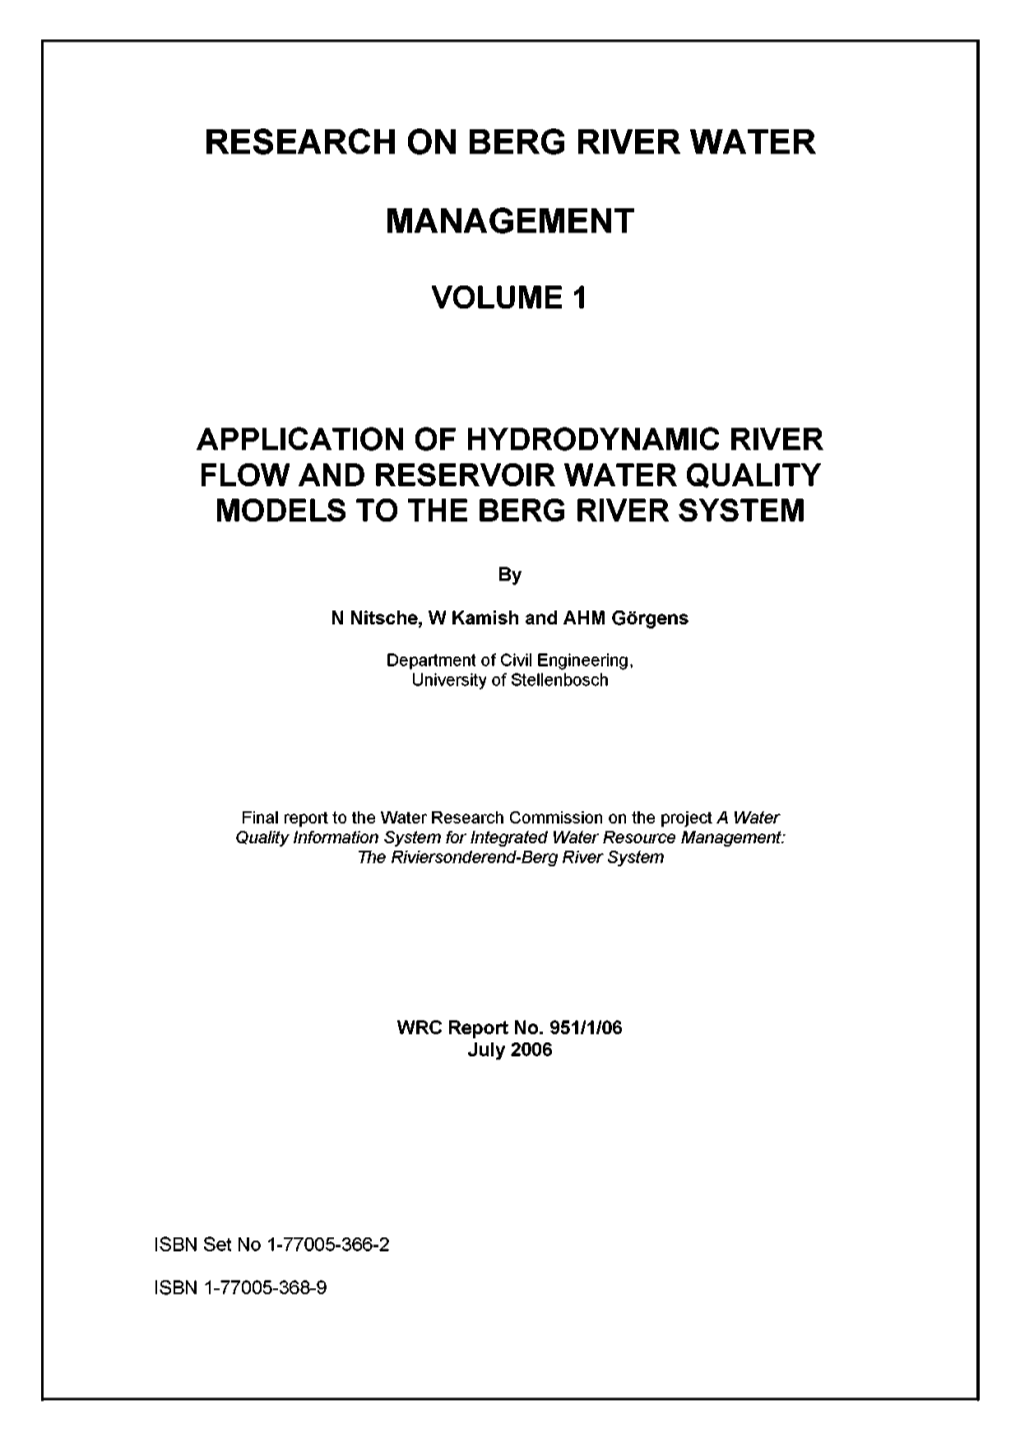 Research on Berg River Water Management